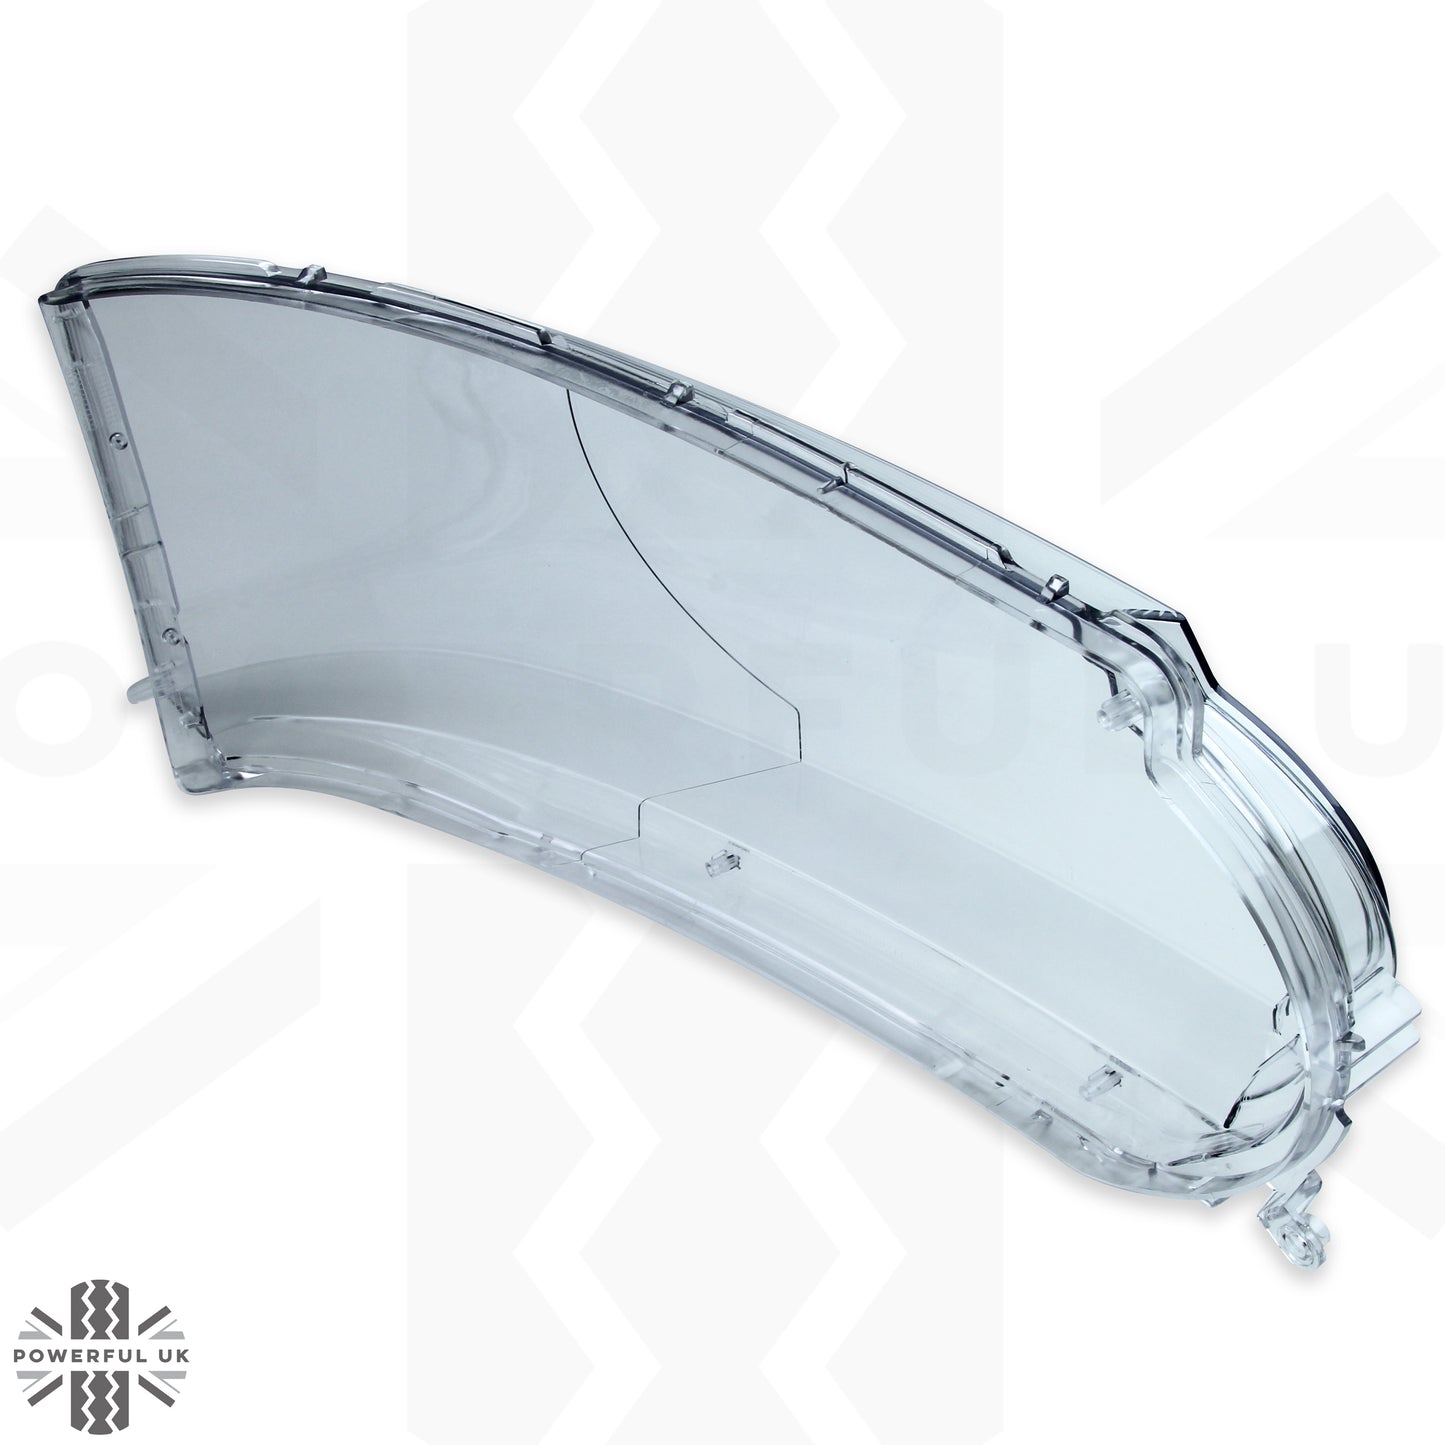 Replacement Headlight Lens for Range Rover L322 2010 - LH